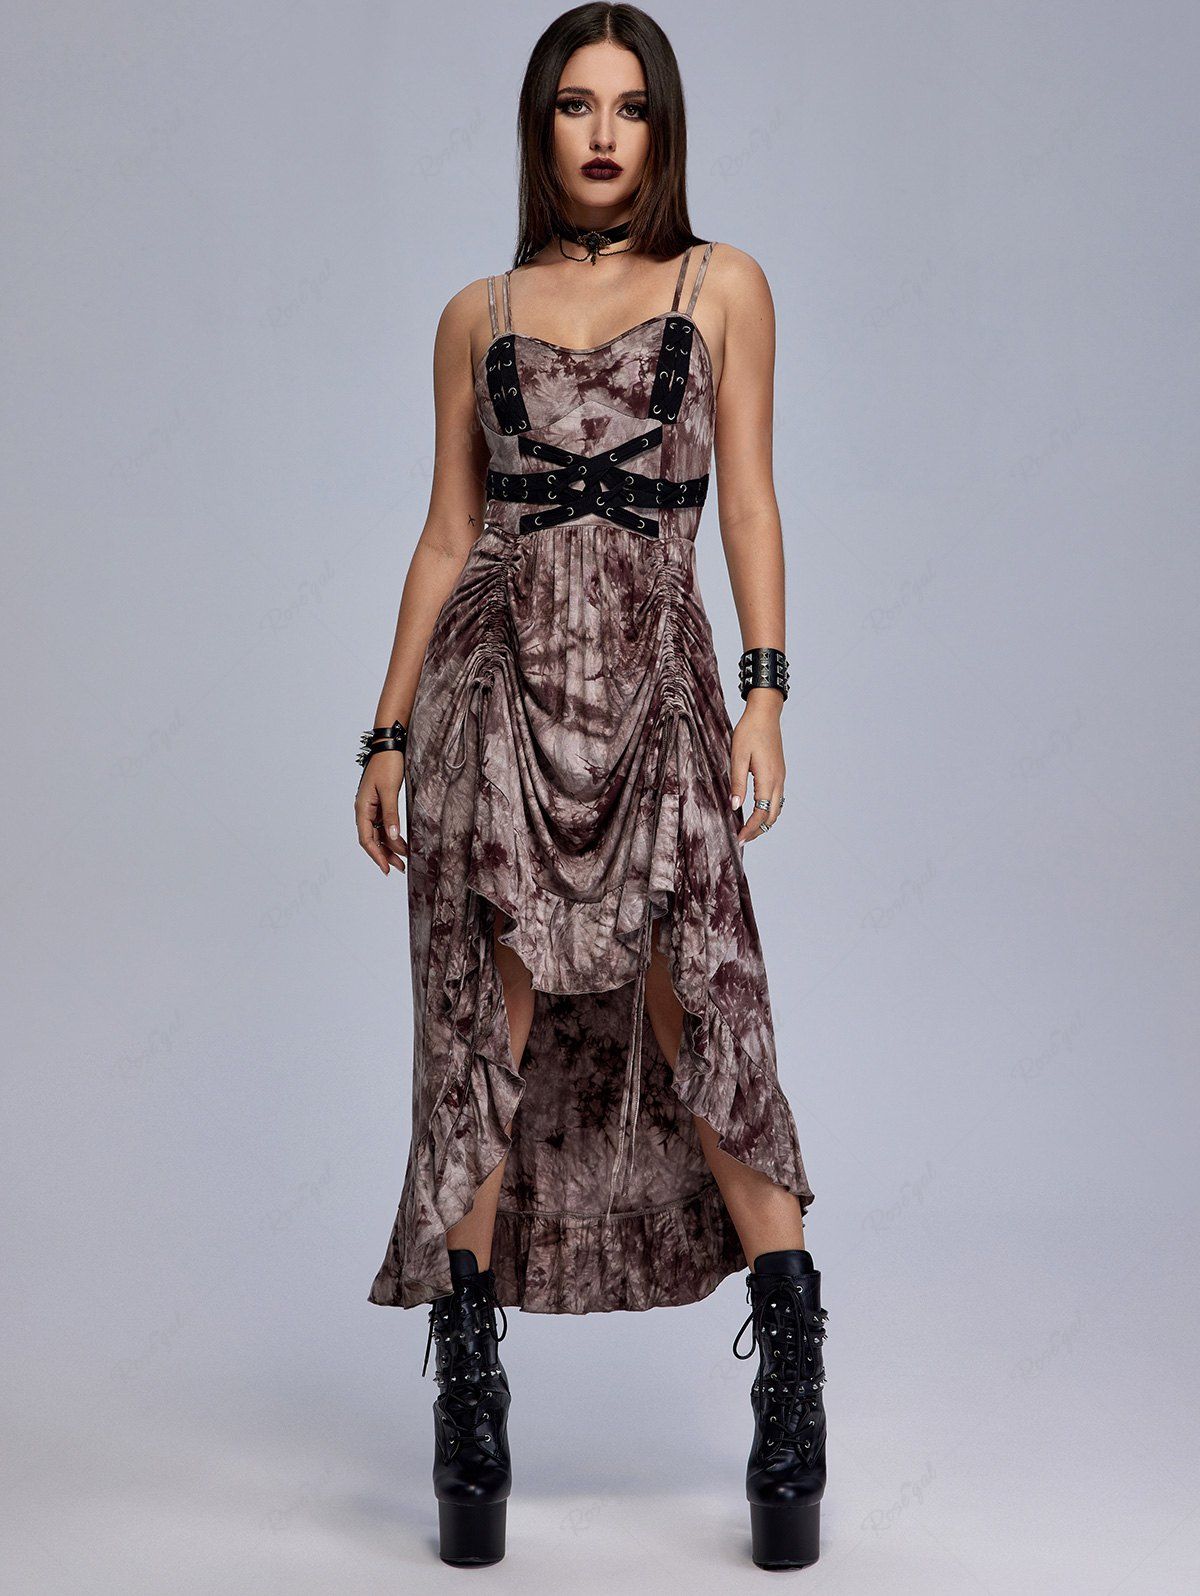 Affordable Gothic Steampunk Tie Dye Grommets Crisscross Ruffle Cinched Ruched Maxi Dress (Adjustable Straps)  